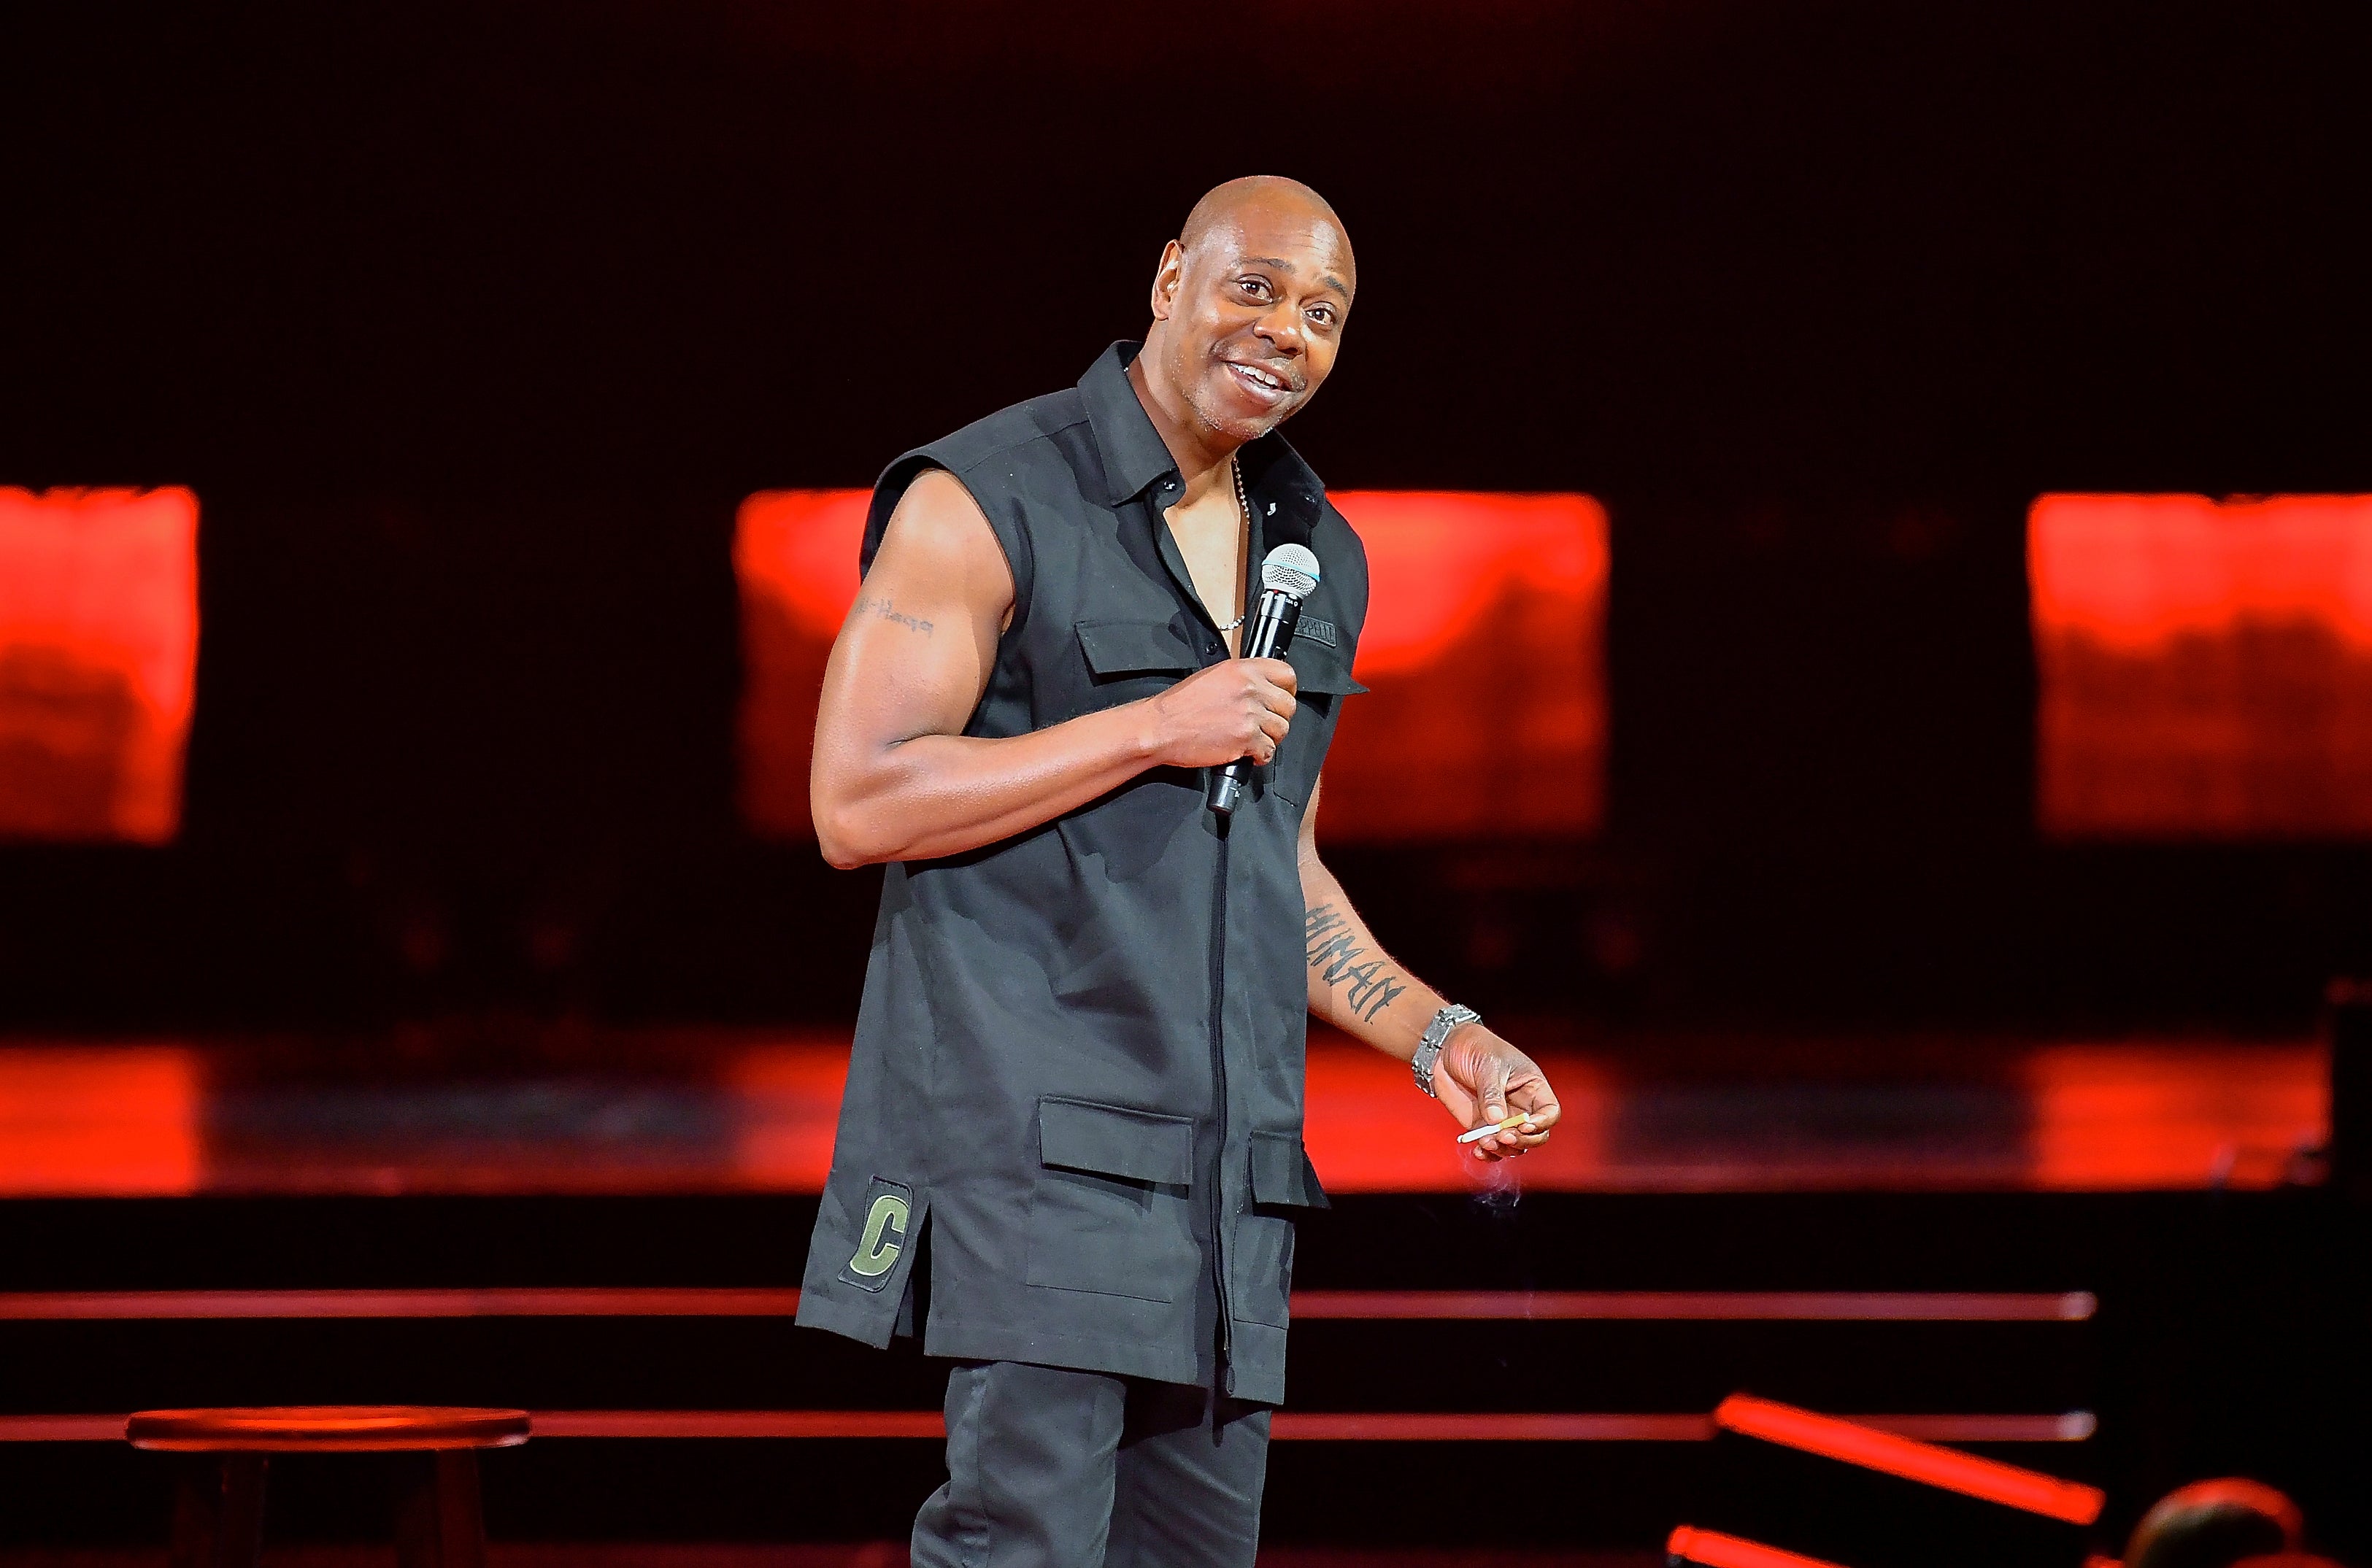 dave chappelle, israel, hamas, antisemitism, dave chappelle urges americans to fight antisemitism years after backlash over ‘antisemitic’ snl speech